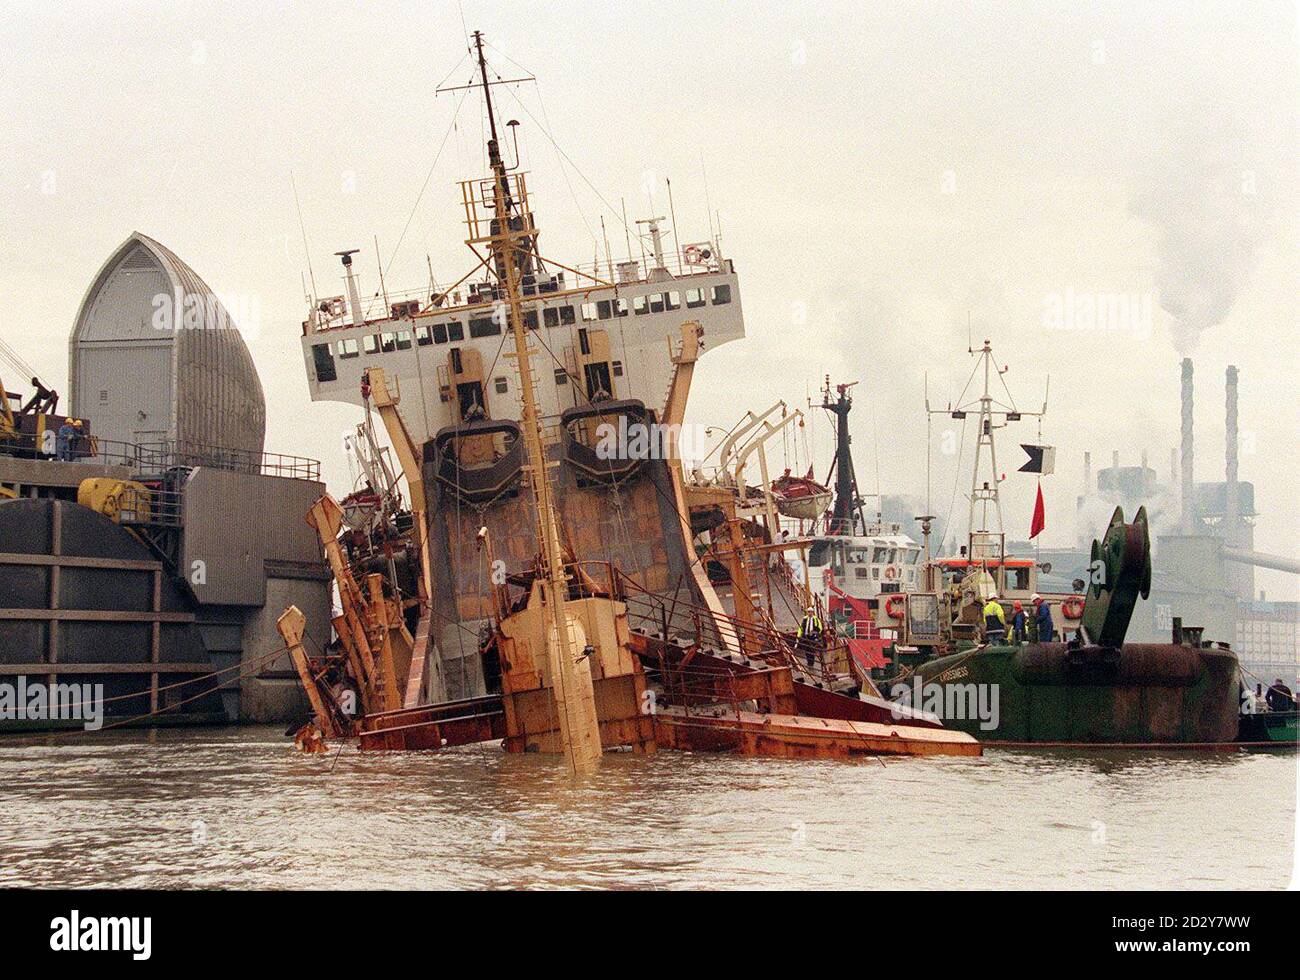 The hull of the 98-metre long ship nose down in the water with its stern in the air, after the vessel crashed into the Thames Barrier in dense fog early this morning (Monday) and sank in shallow water.  No one was injured in the crash and 10 crew members were taken to shore when the Sand Kite collided with the barrier in thick fog at 6.50am. See PA Story ACCIDENT Ship. Photo by David Giles. Stock Photo